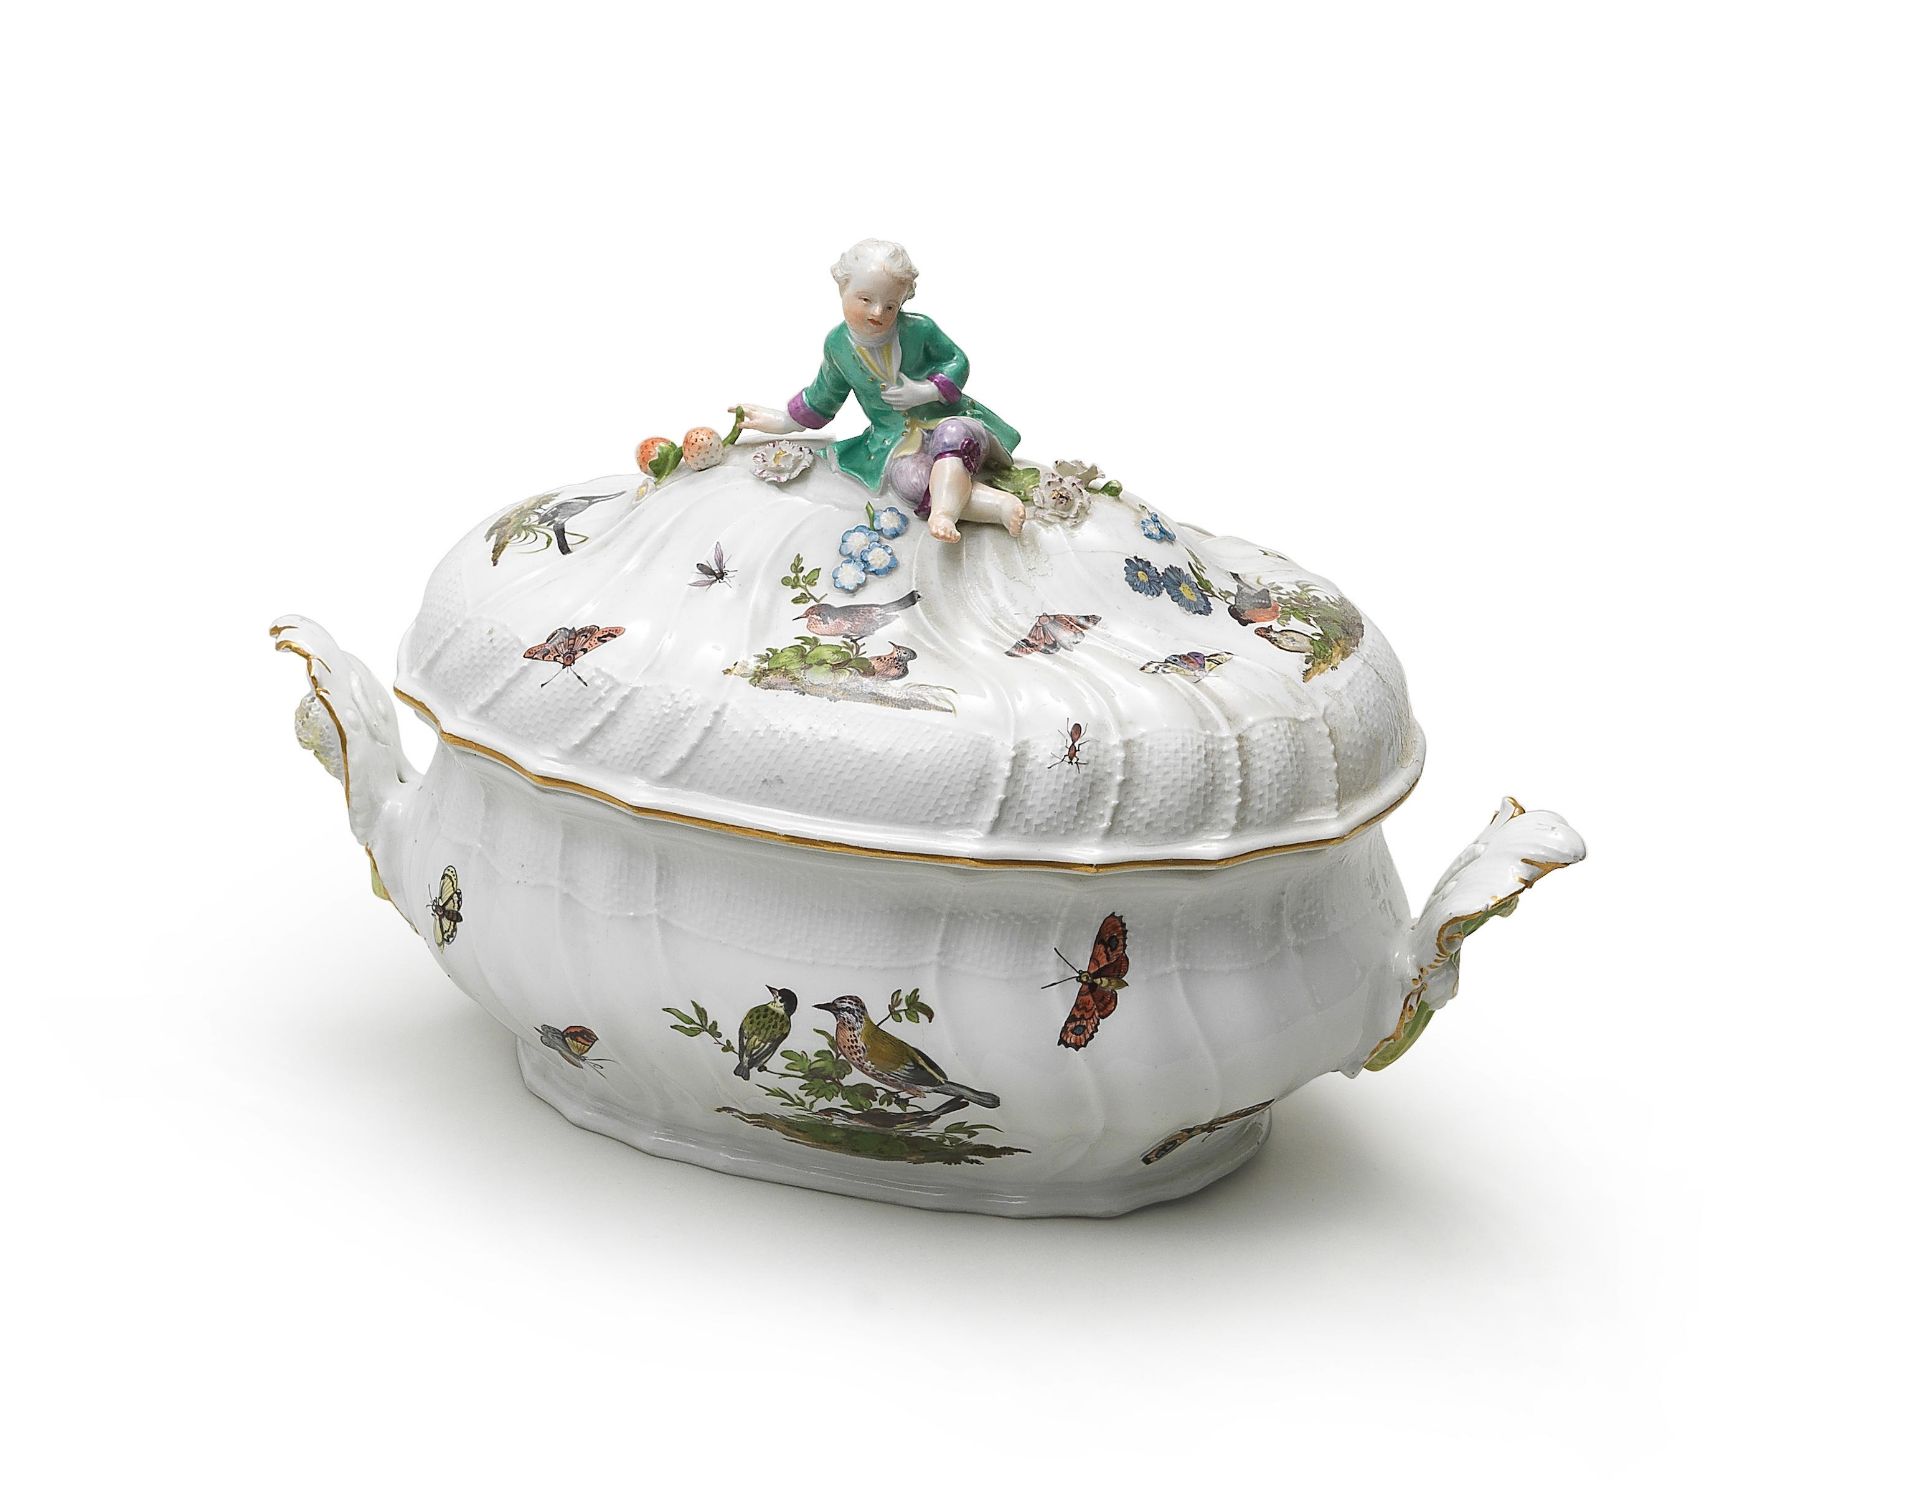 A Meissen oval tureen and cover, circa 1755-60